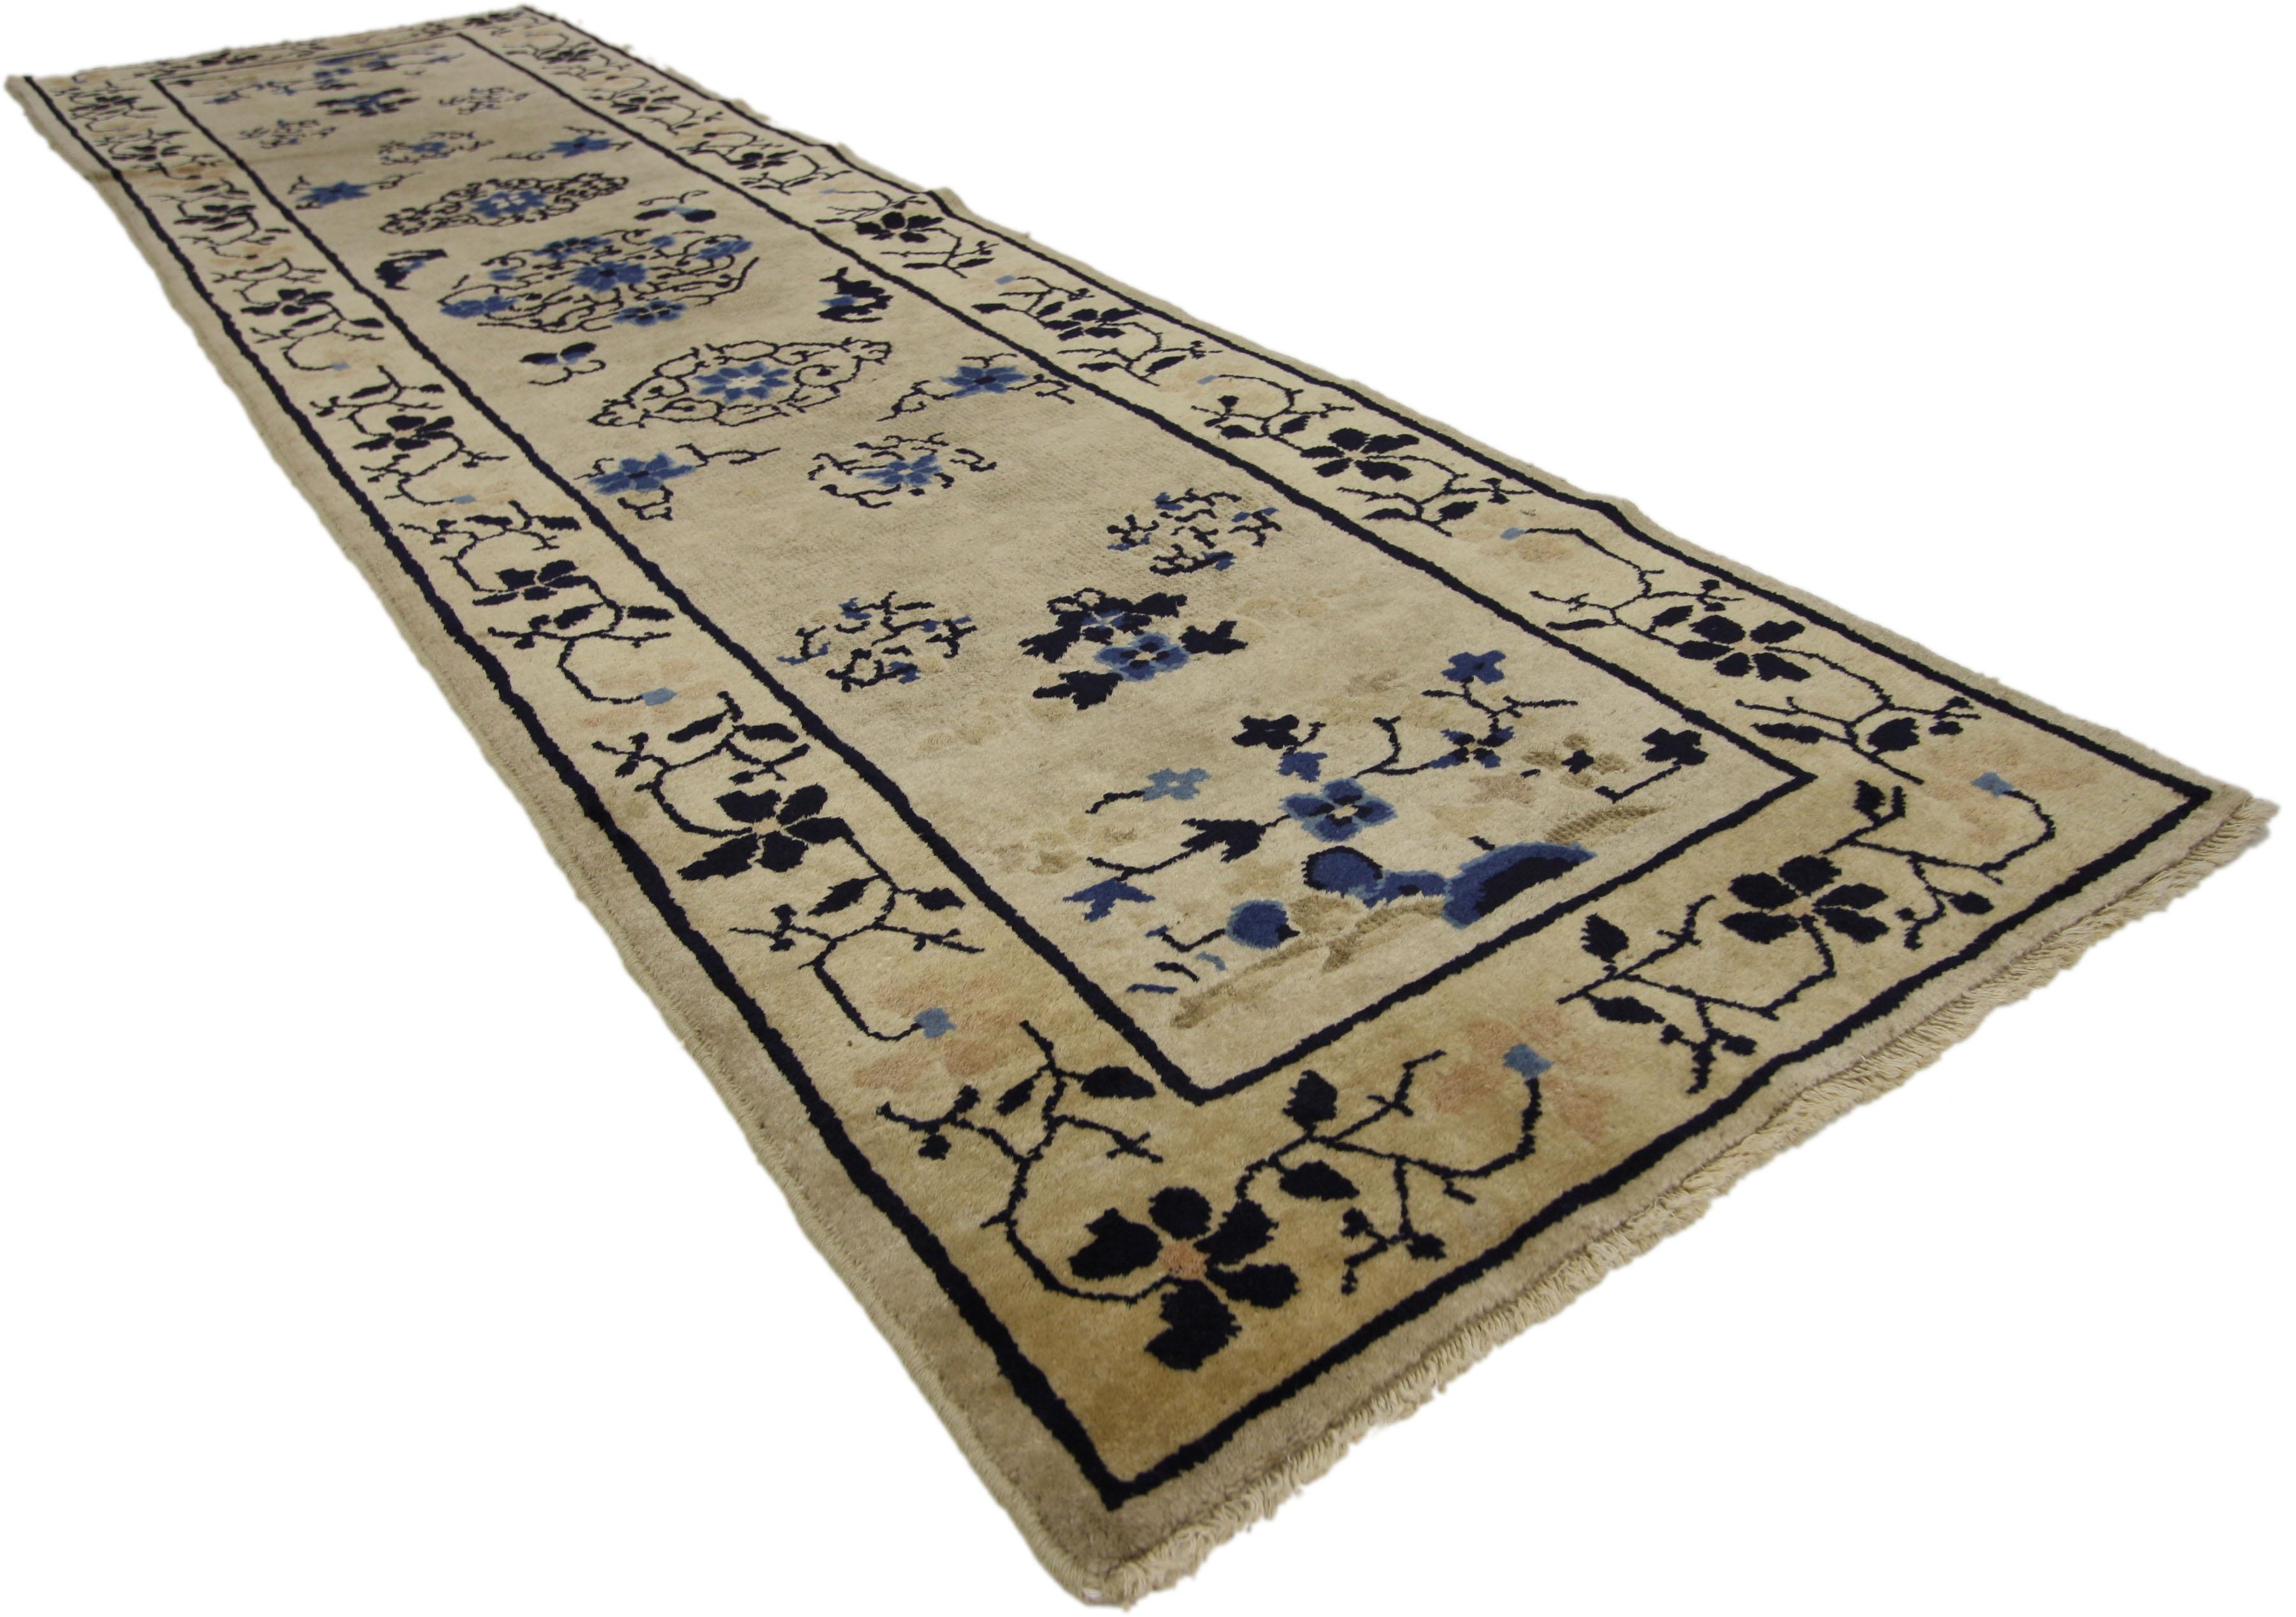 77173, antique Chinese Peking runner with chinoiserie Chic style - Hallway runner. This hand-knotted wool antique Chinese Peking features three medallions with sparse floral sprays on an open ground abrashed greige field. Two thin black lines create